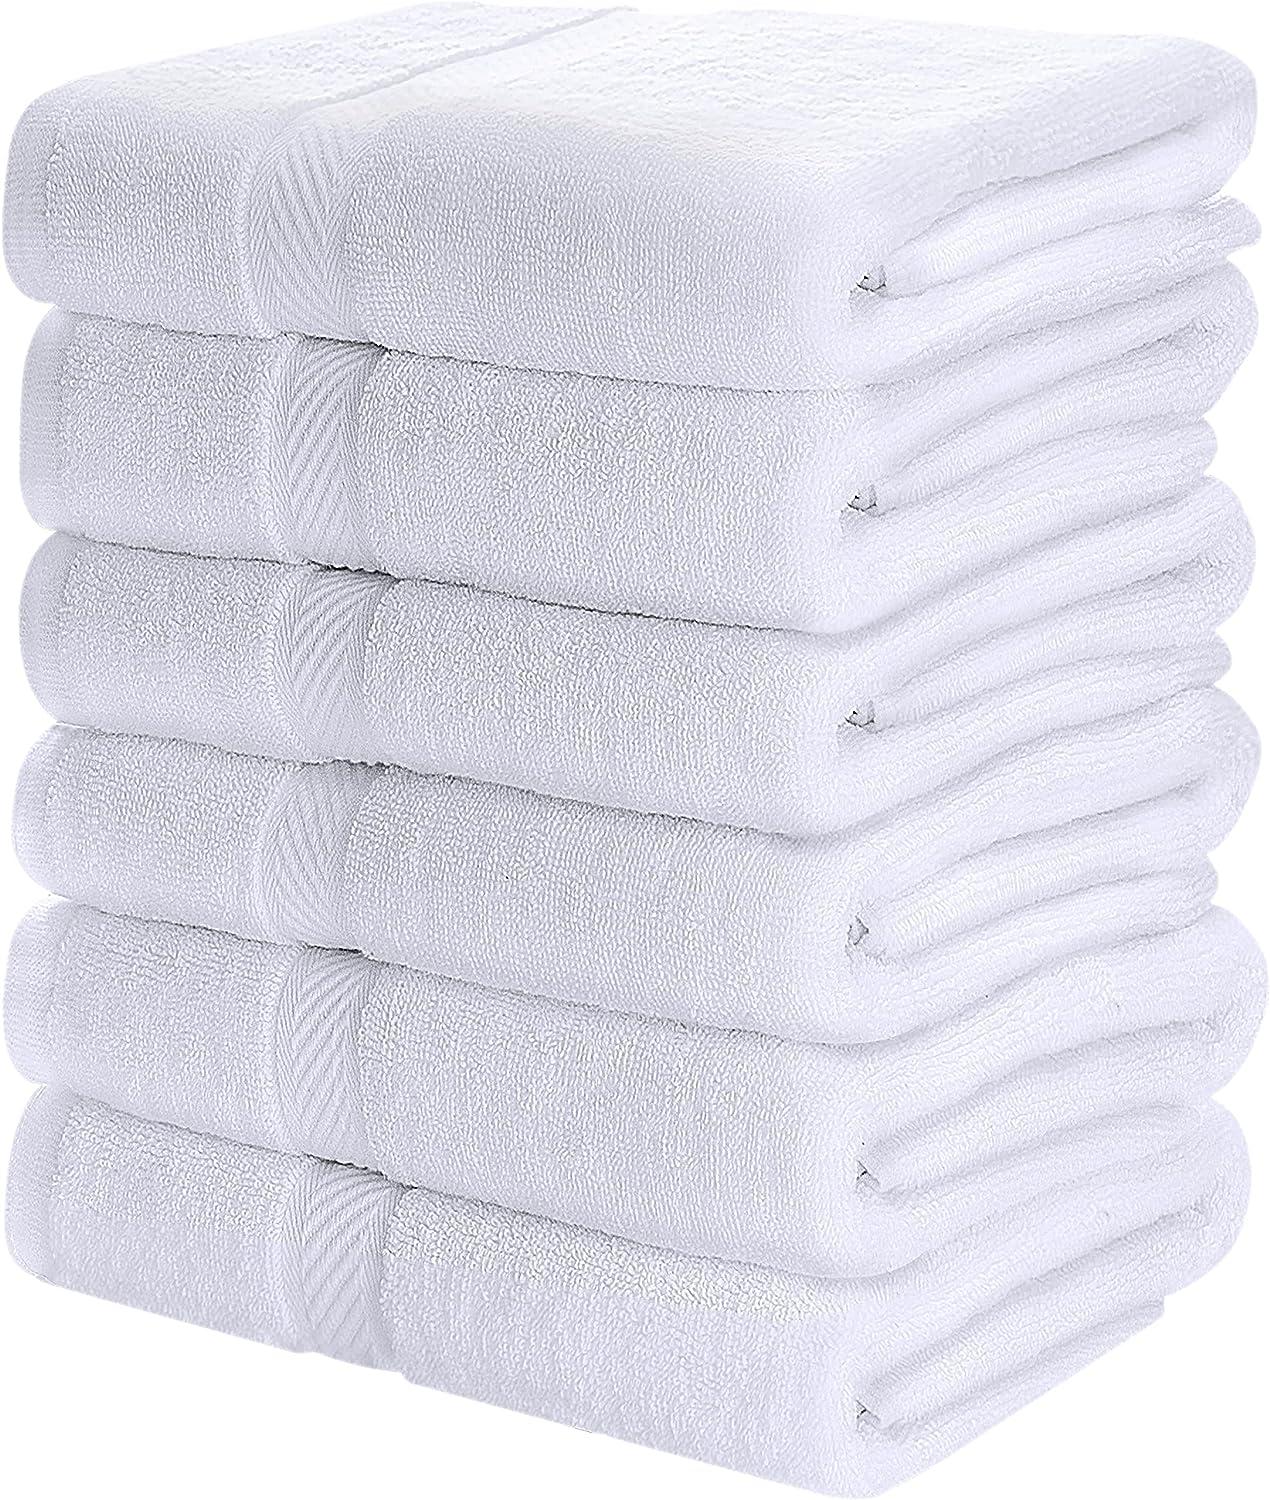 Utopia Towels 6 Pack Medium Bath Towel Set, 100% Ring Spun Cotton (24 x 48  Inches) Medium Lightweight and Highly Absorbent Quick Drying Towels